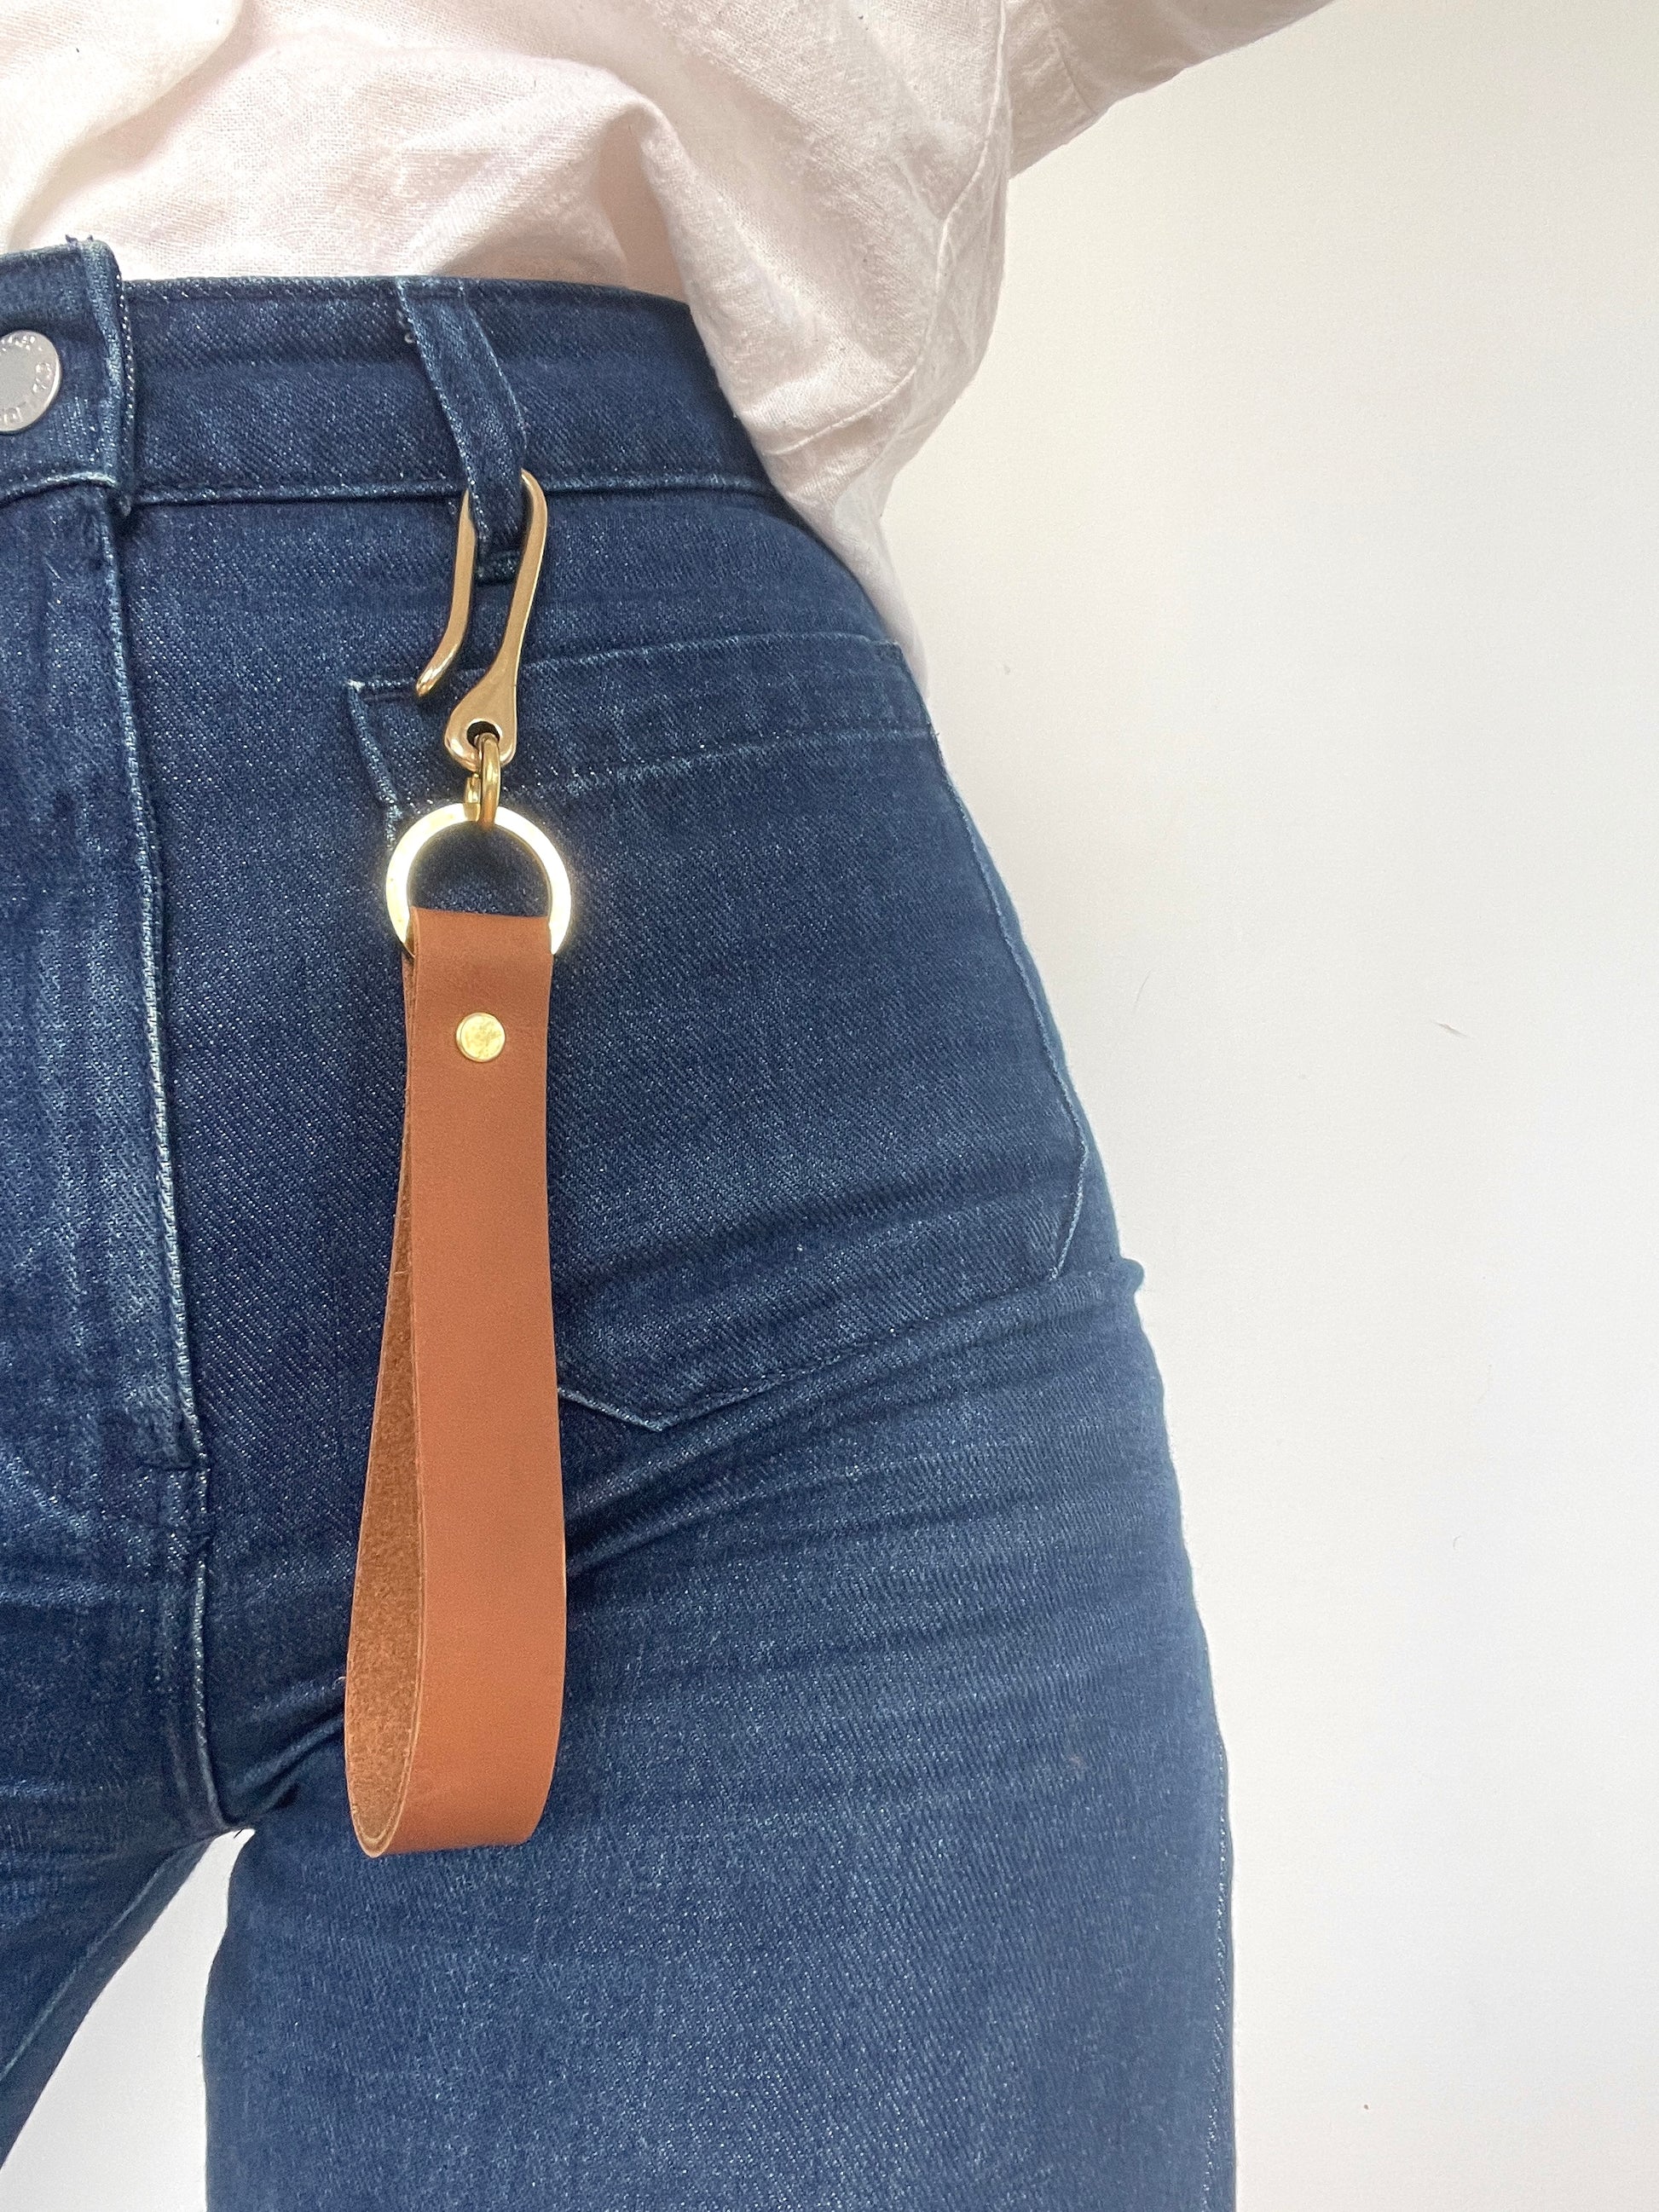 Leather and Brass Wristlet Key Chain- Wholesale 3 colour options Leather Bag - handcrafted by Market Canvas Leather in Tofino, BC, Canada